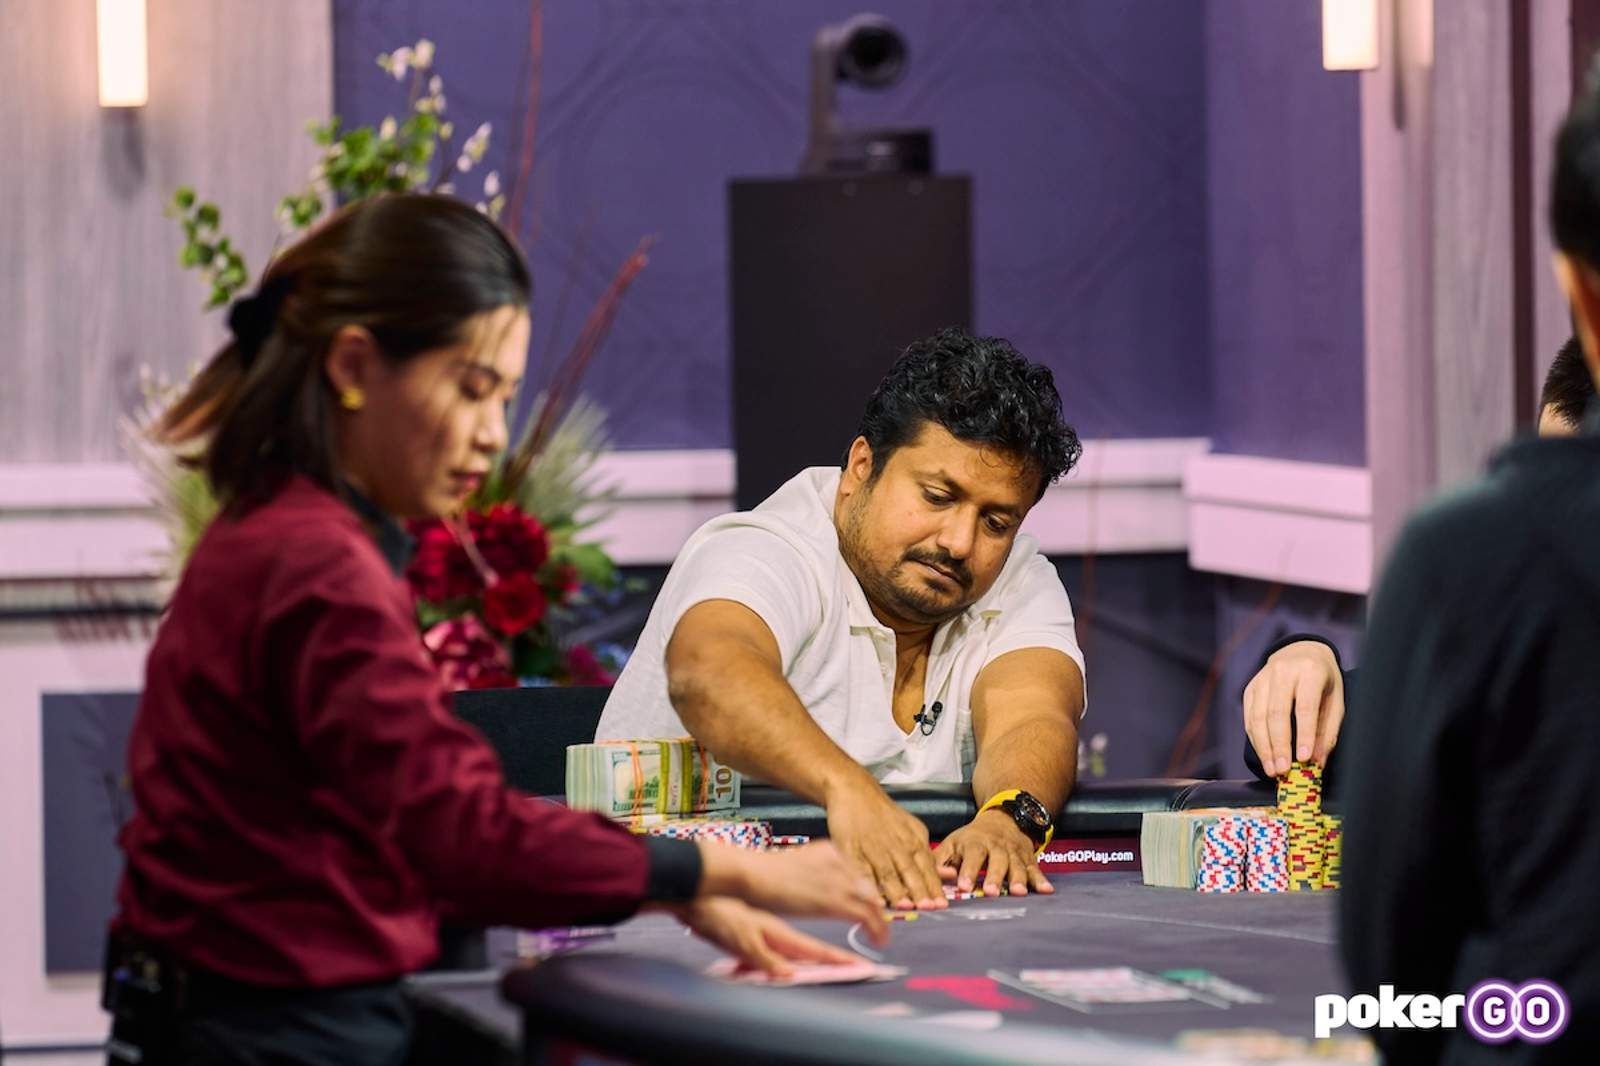 Santhosh Suvarna Wins Largest-Ever Pot In High Stakes Poker History